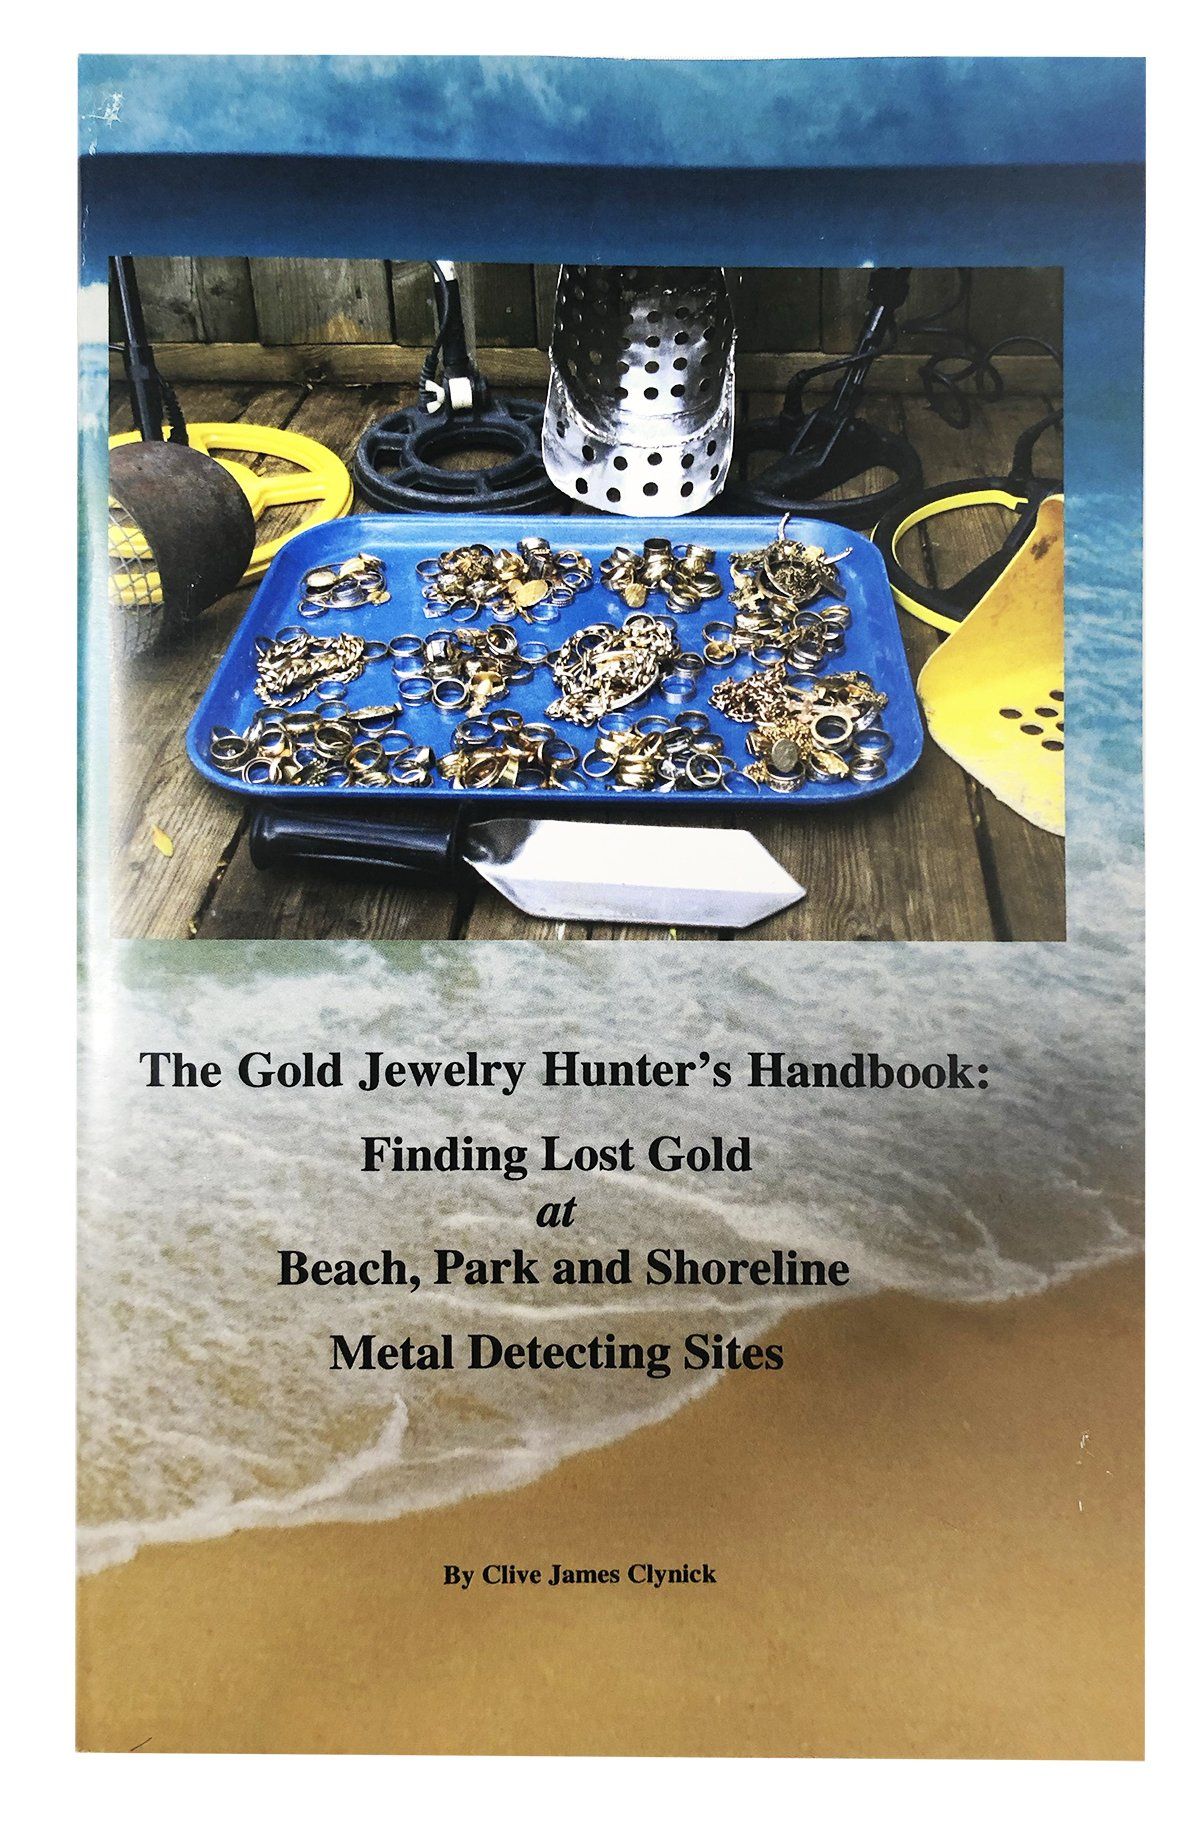 The Gold Jewelry Hunter's Handbook: Finding Lost Gold at Beach, Park and Shoreline Metal Detecting Sites By Clive James Clynick Clive James Clynick 